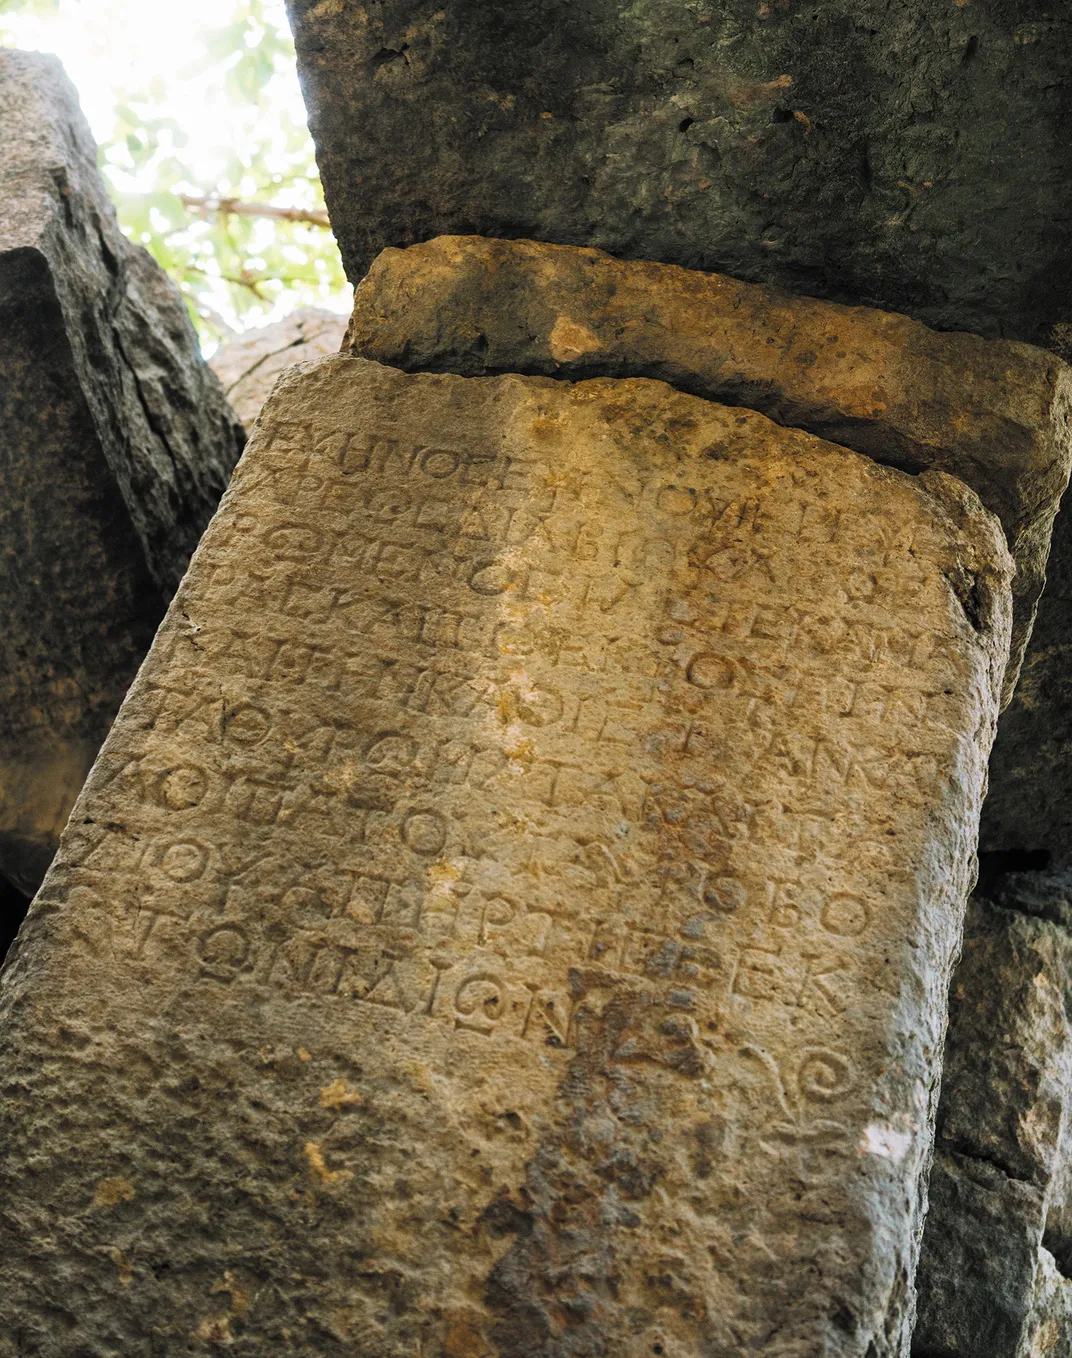 an inscribed slab in Pednelissos, describing Hellenistic-era repairs made to the city walls